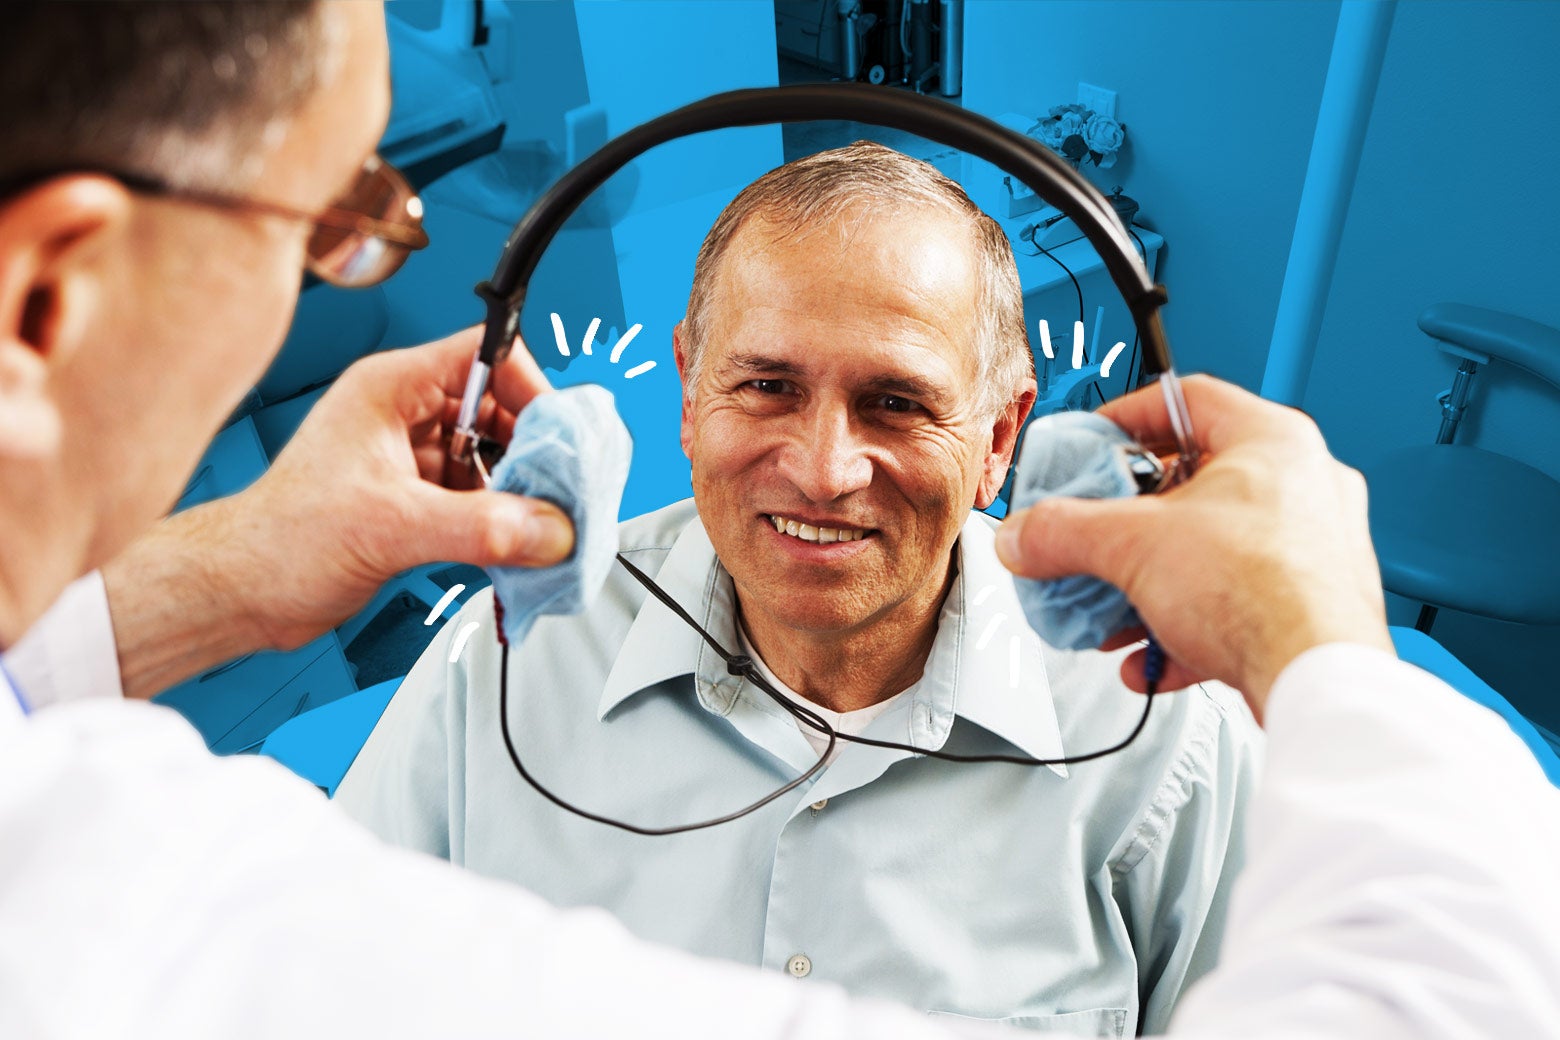 A dentist presents a patient with headphones.